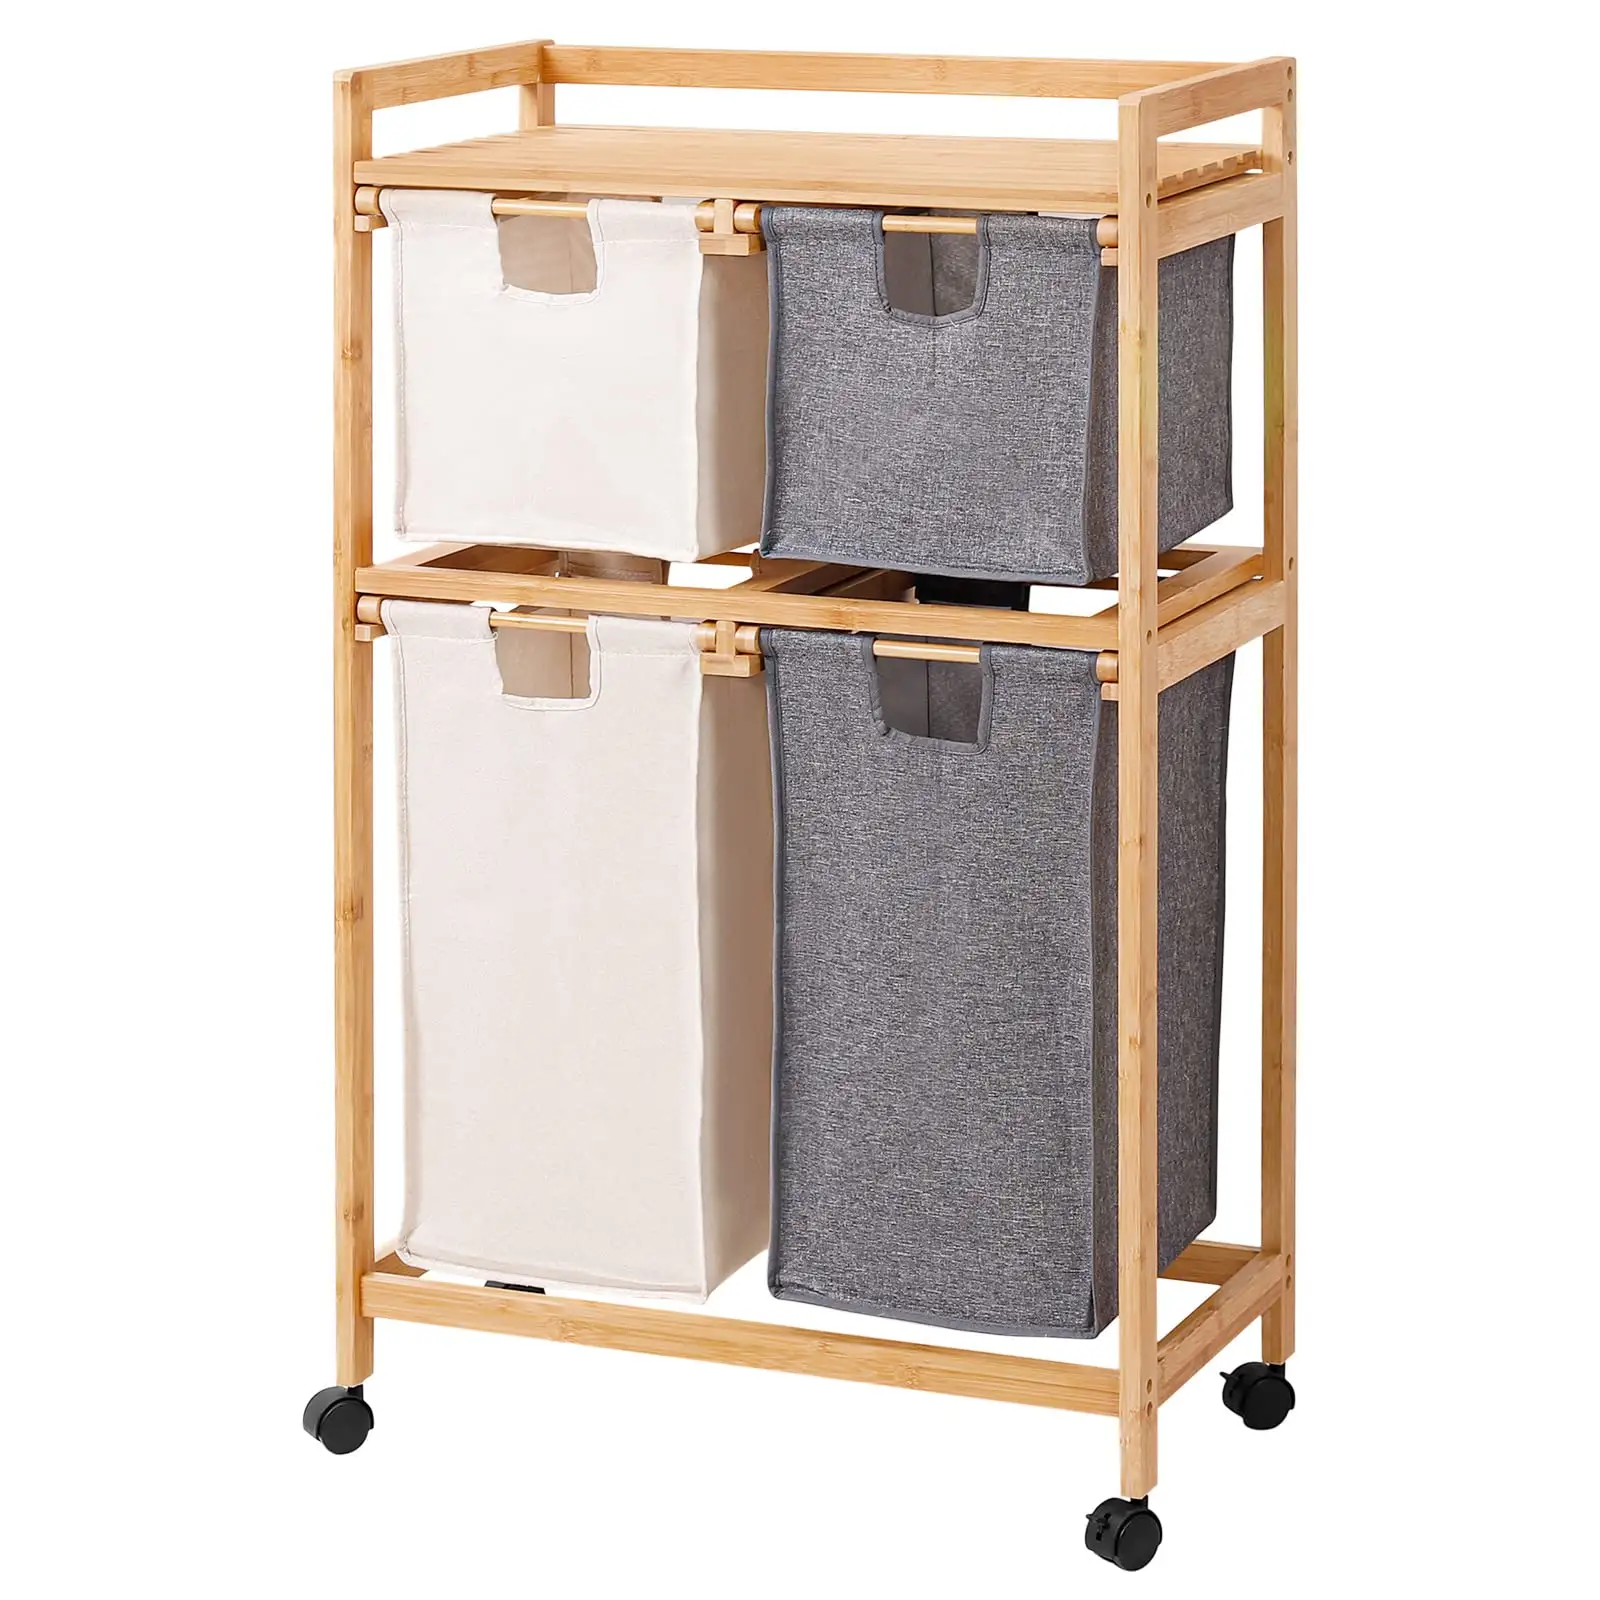 Custom Bamboo Laundry Basket with Wheel Pull-out Laundry Hamper with 4 Section Laundry Sorter Cart for Bathroom